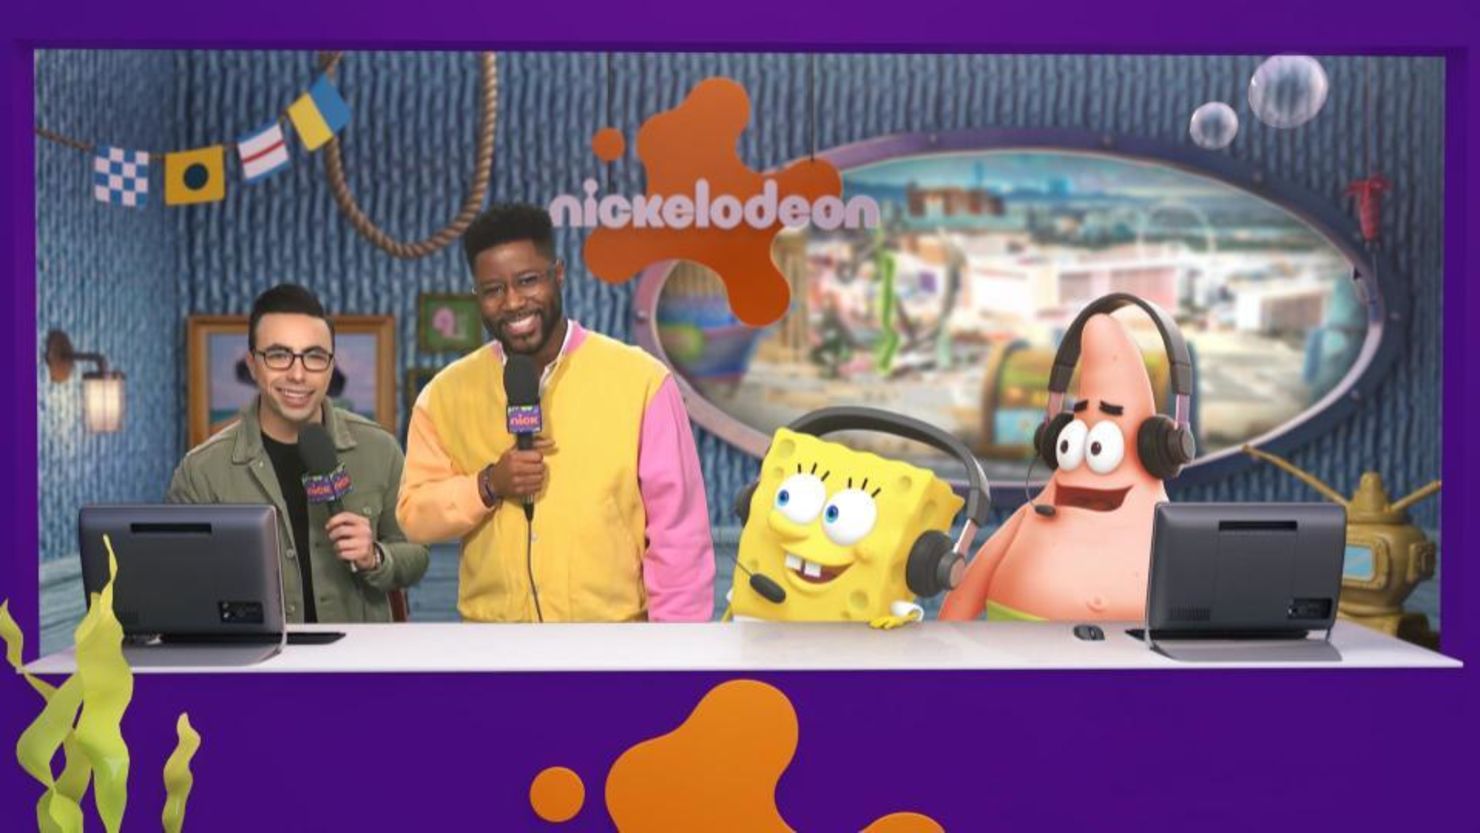 <em>Super Bowl LVIII Live from Bikini Bottom</em> will feature SpongeBob SquarePants and Patrick Star live in the booth alongside CBS Sports’ Nate Burleson and play-by-play announcer Noah Eagle.